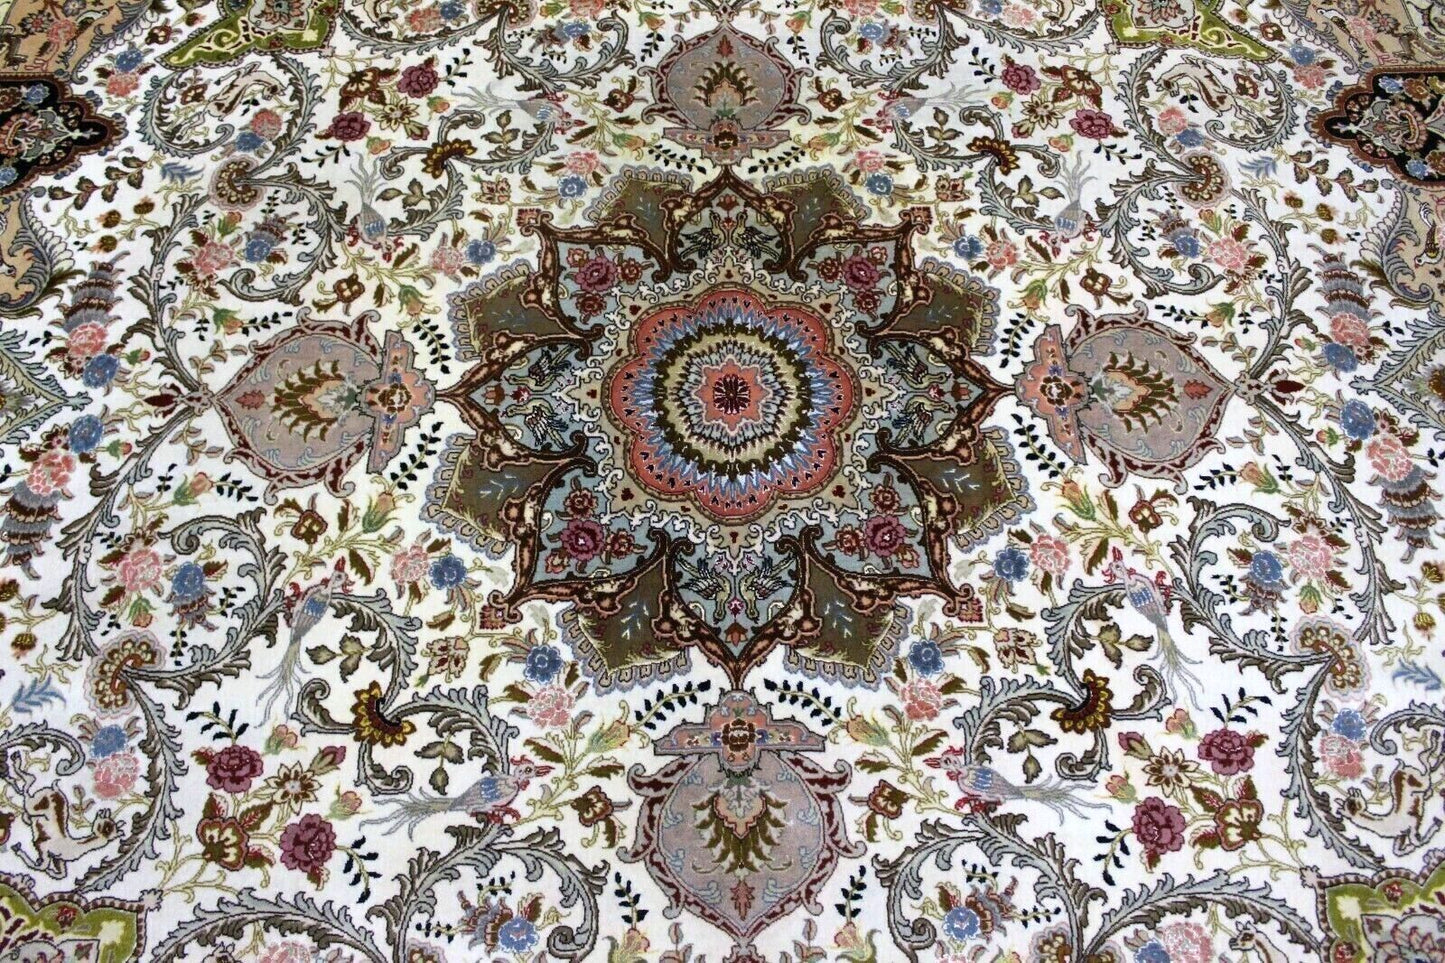 Close-up of floral motifs on Handmade Vintage Persian Tabriz Rug - Delicate flowers and vines intertwined in rich reds, blues, and greens.